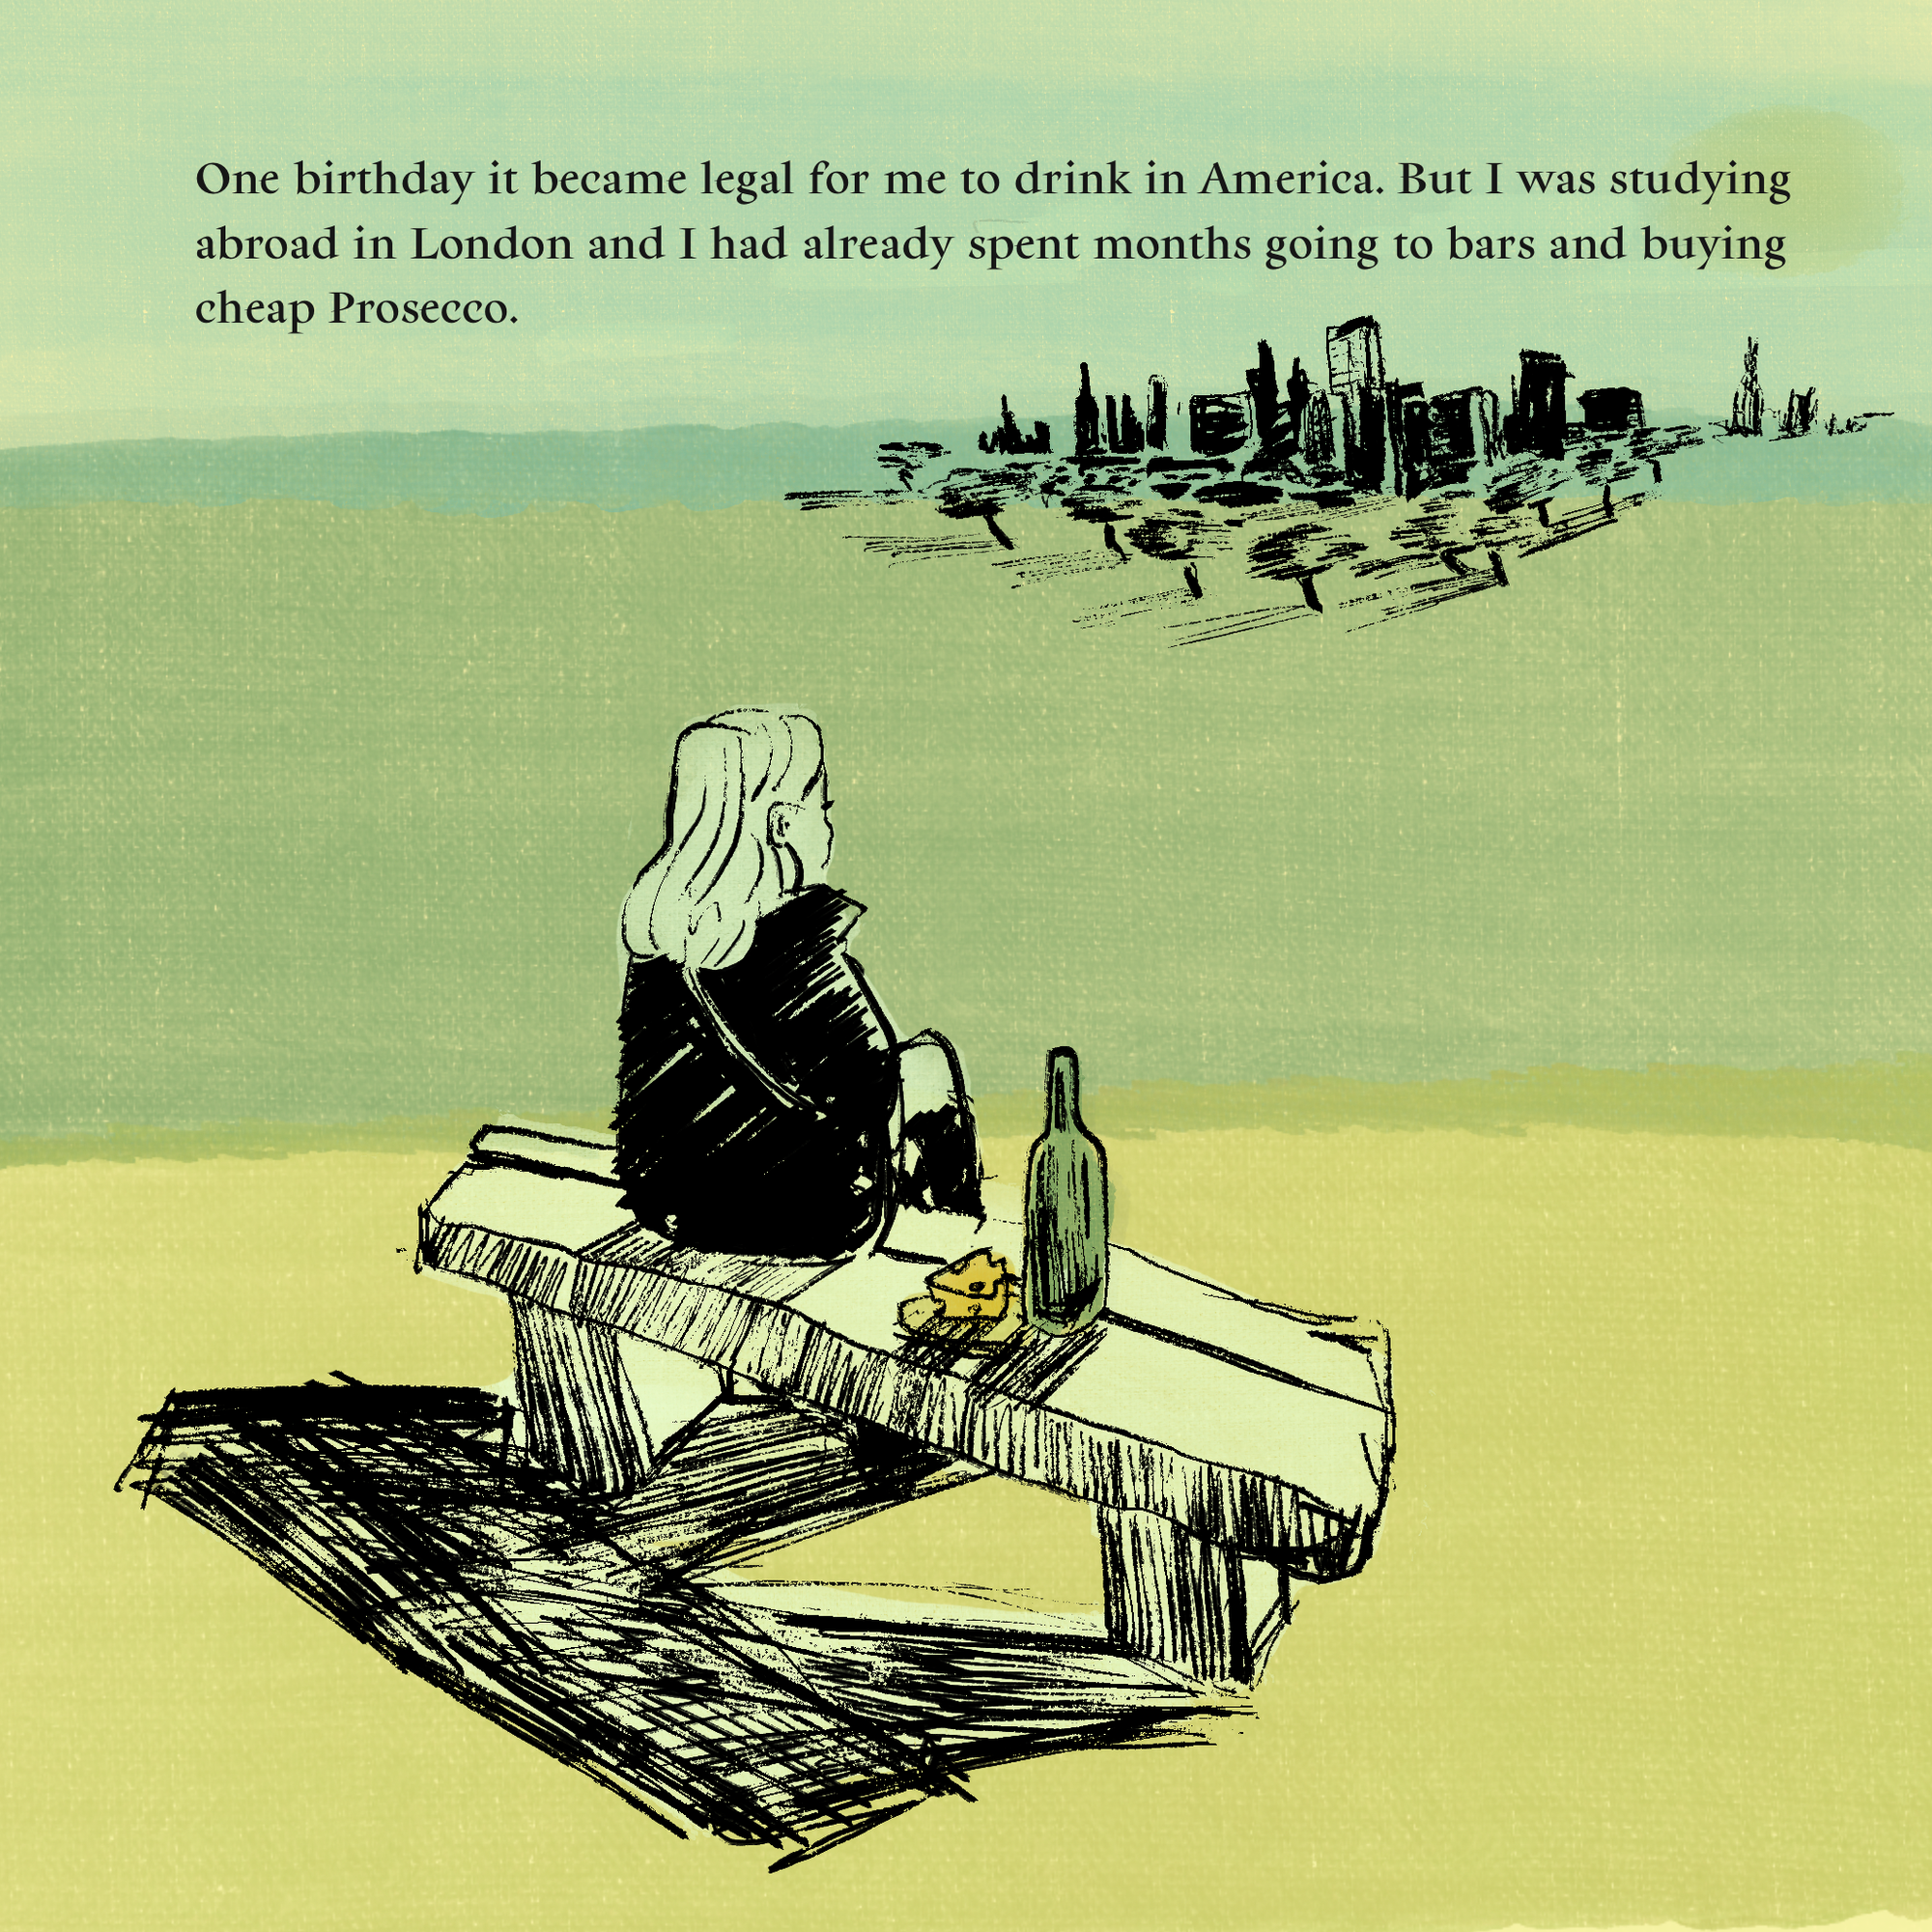 A illustration of a woman (presumably the author) sits on a bench with a triangle of cheese and a bottle, looking at a city in the distance. Text reads: One birthday it became legal for me to drink in America. But I was studying abroad in London and I had already spent months going to bars and buying cheap Prosecco.